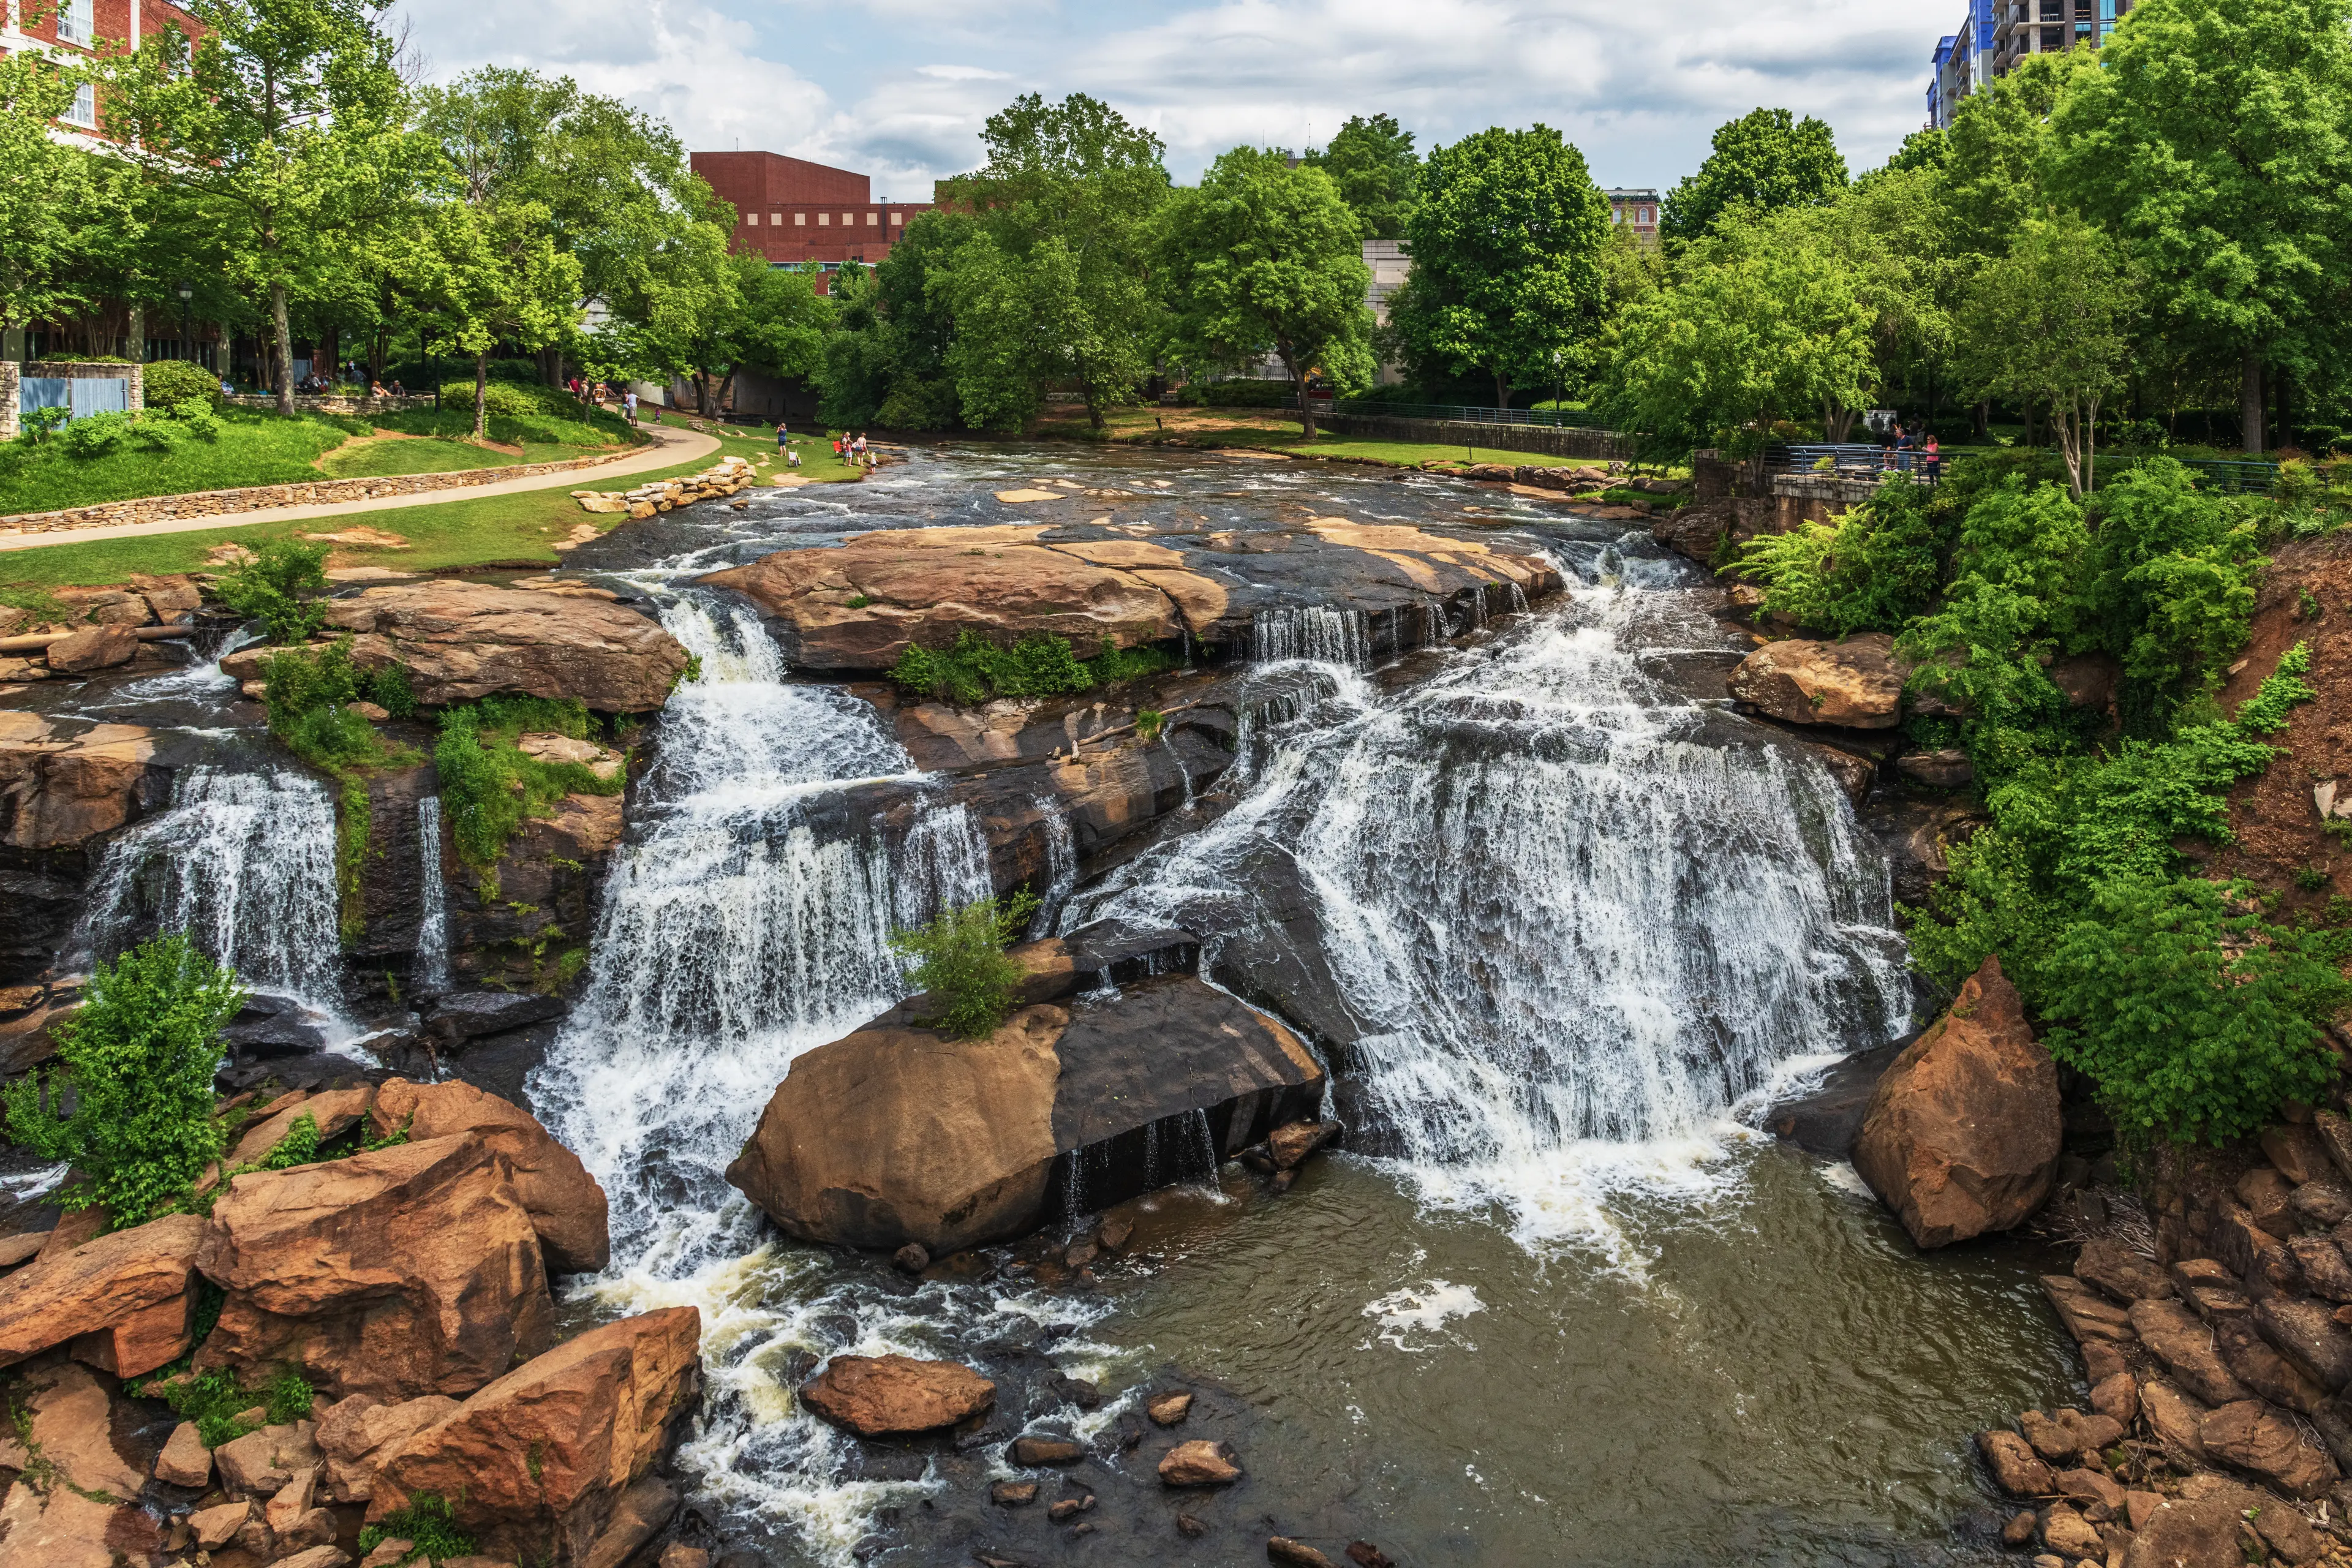 3-Day Solo Adventure: Outdoor Explorations in Greenville, SC